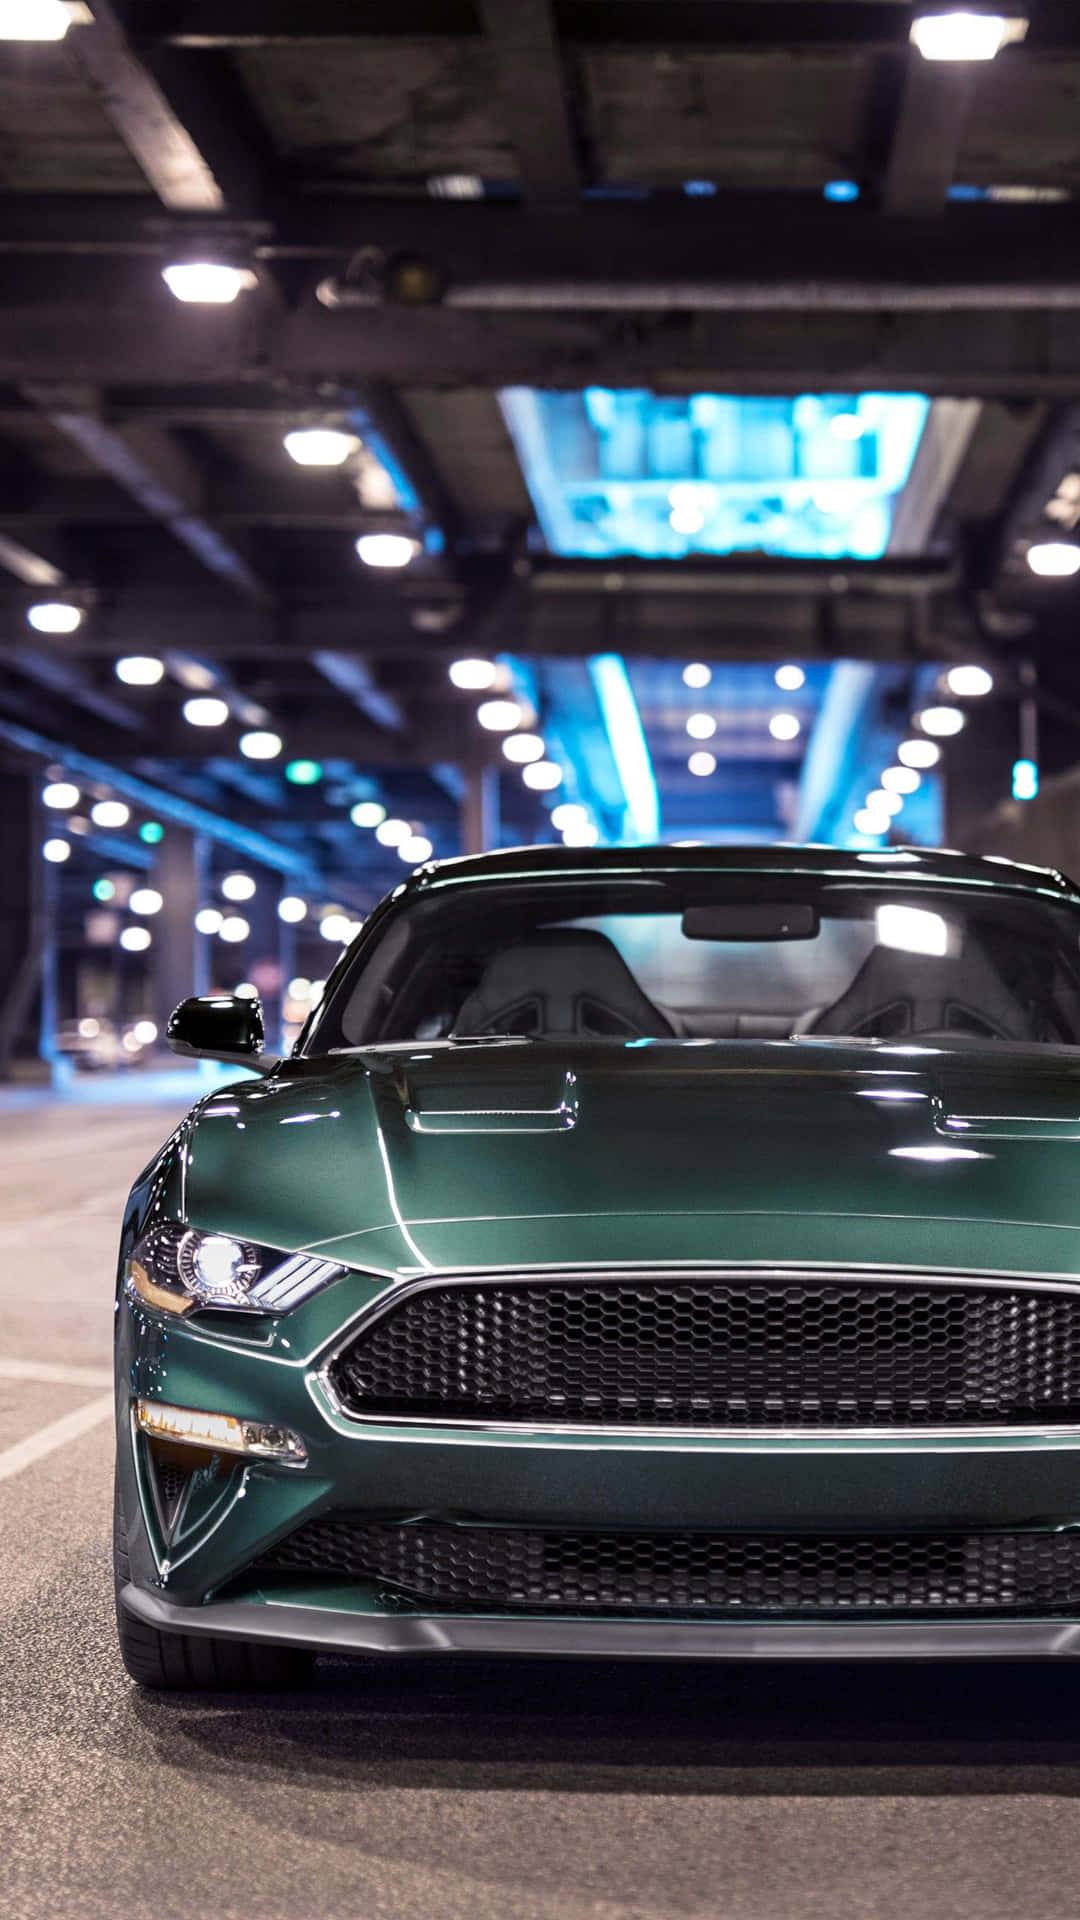 Feel the power of the Ford Mustang while you scroll on your iPhone Wallpaper